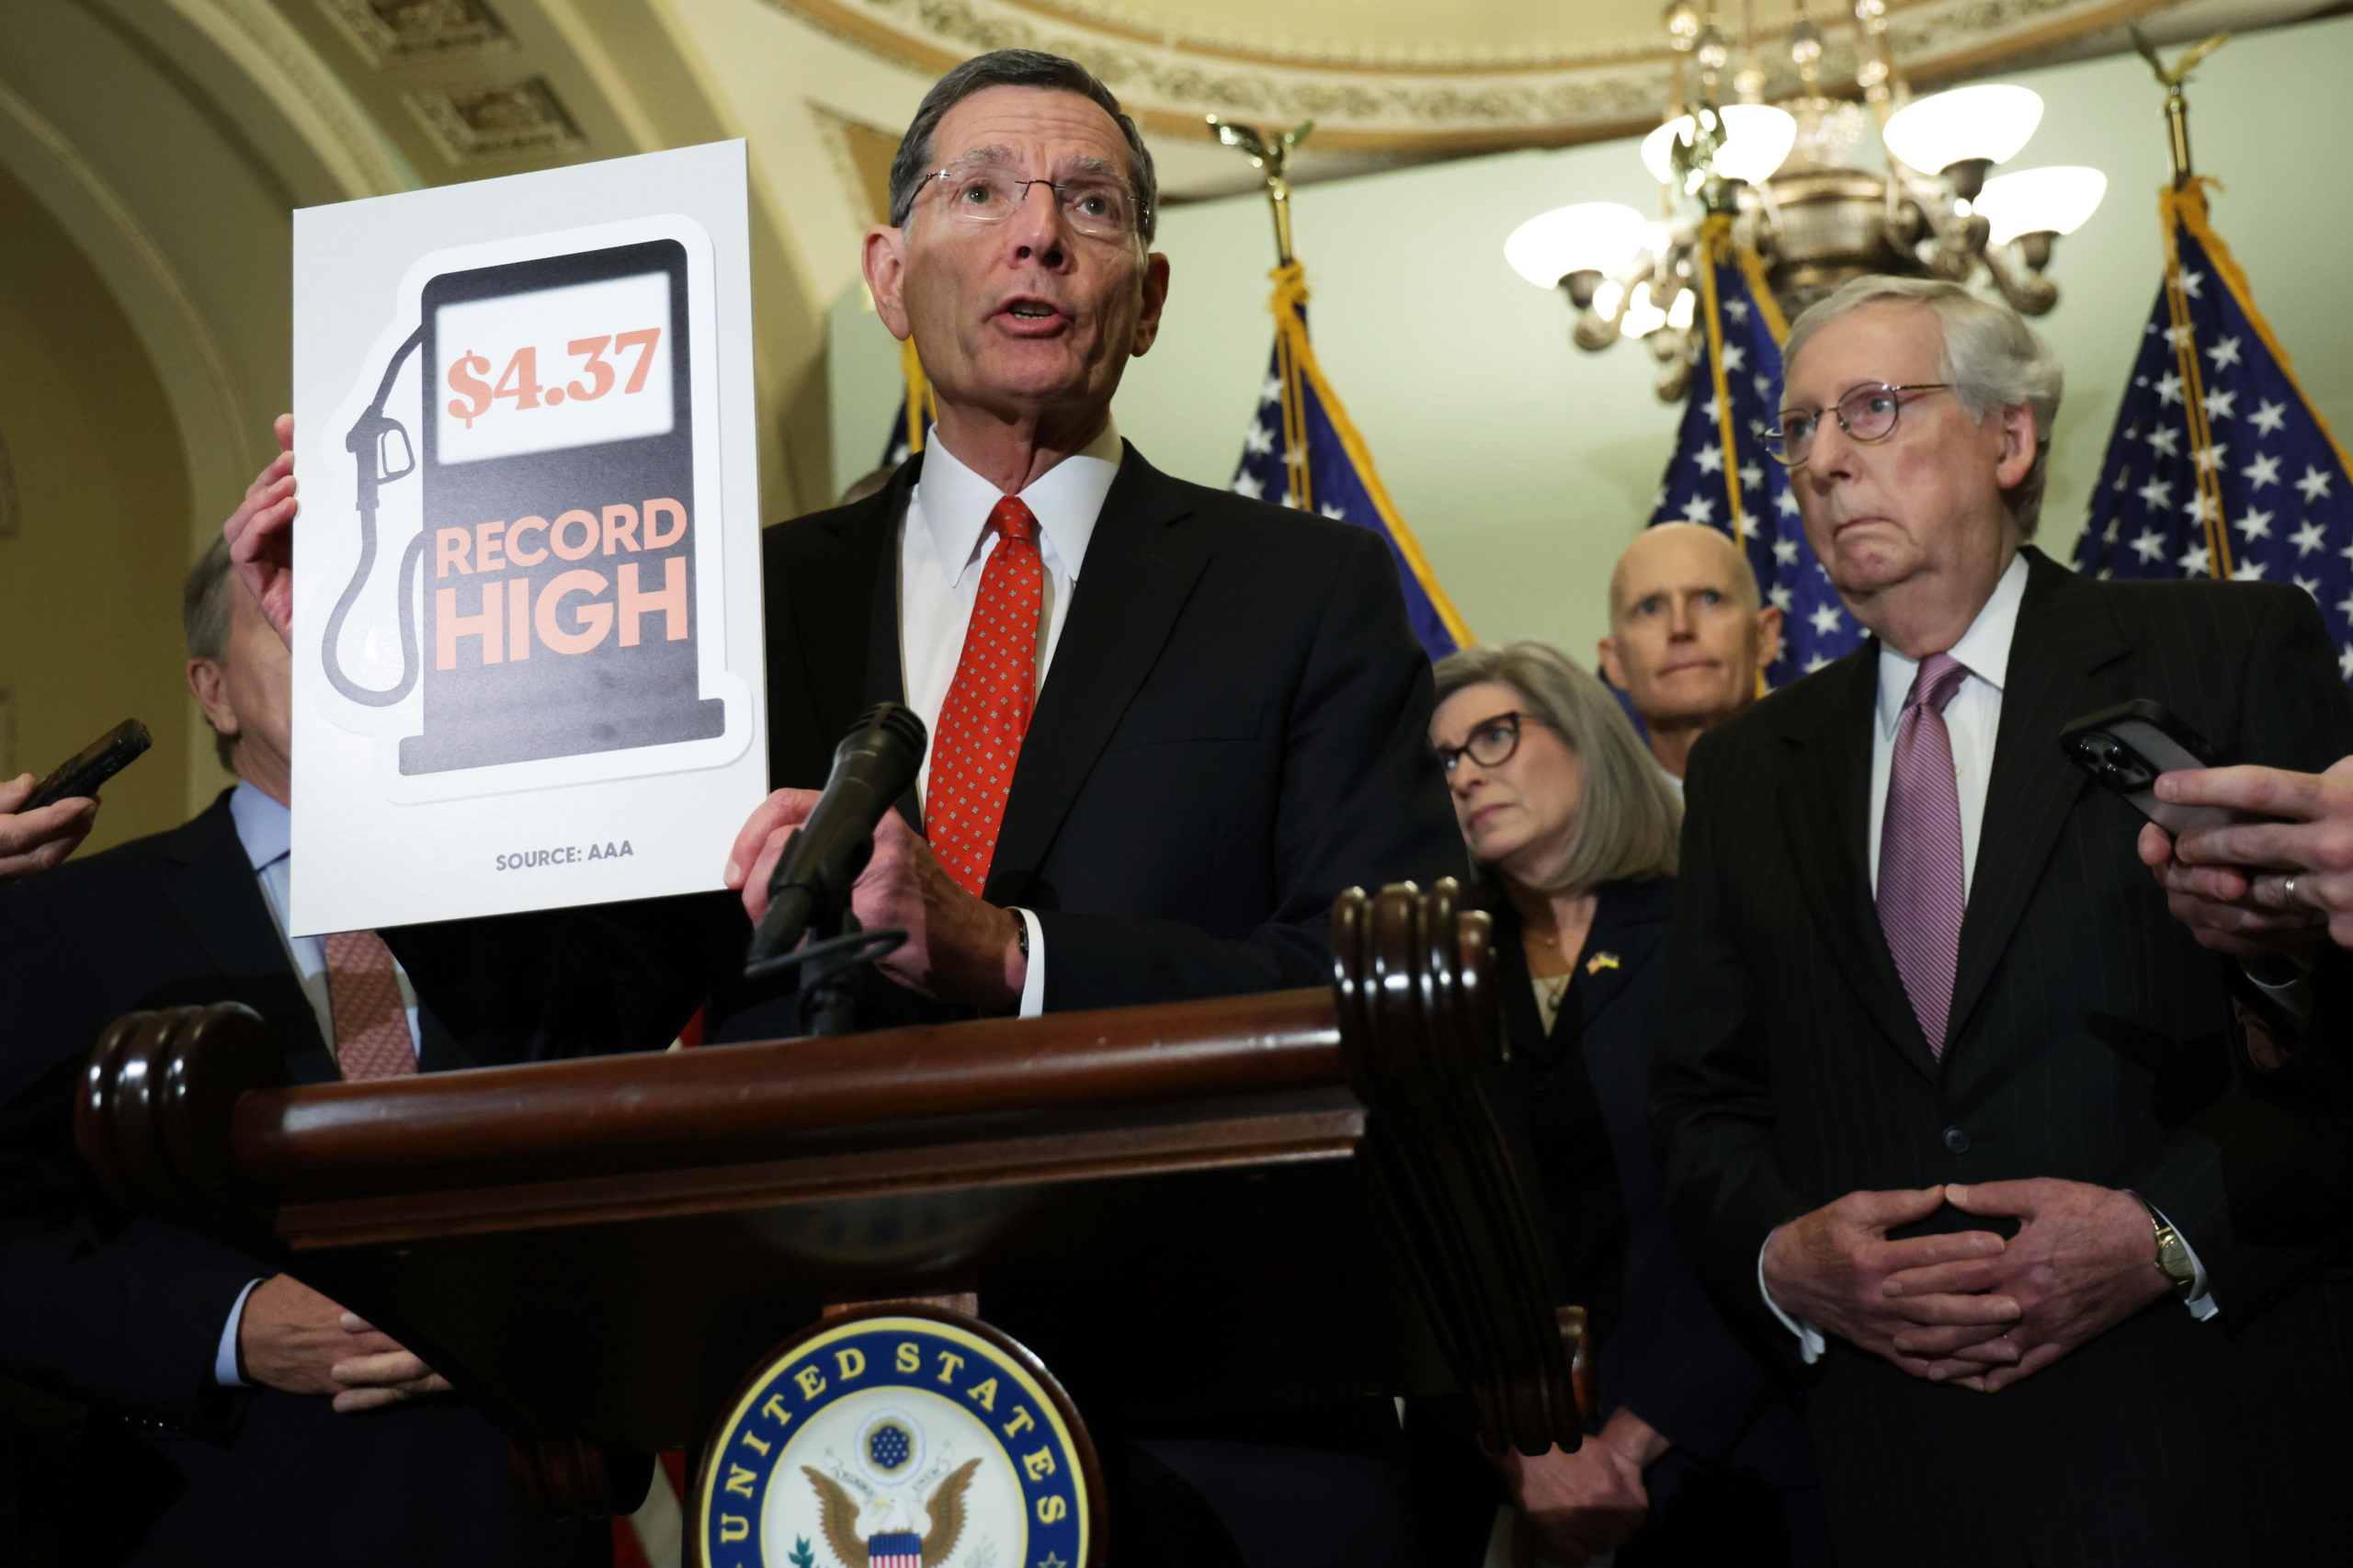 Republican Sen. John Barrasso holds up a sign about gasoline prices on May 10. (Alex Wong/Getty Images)